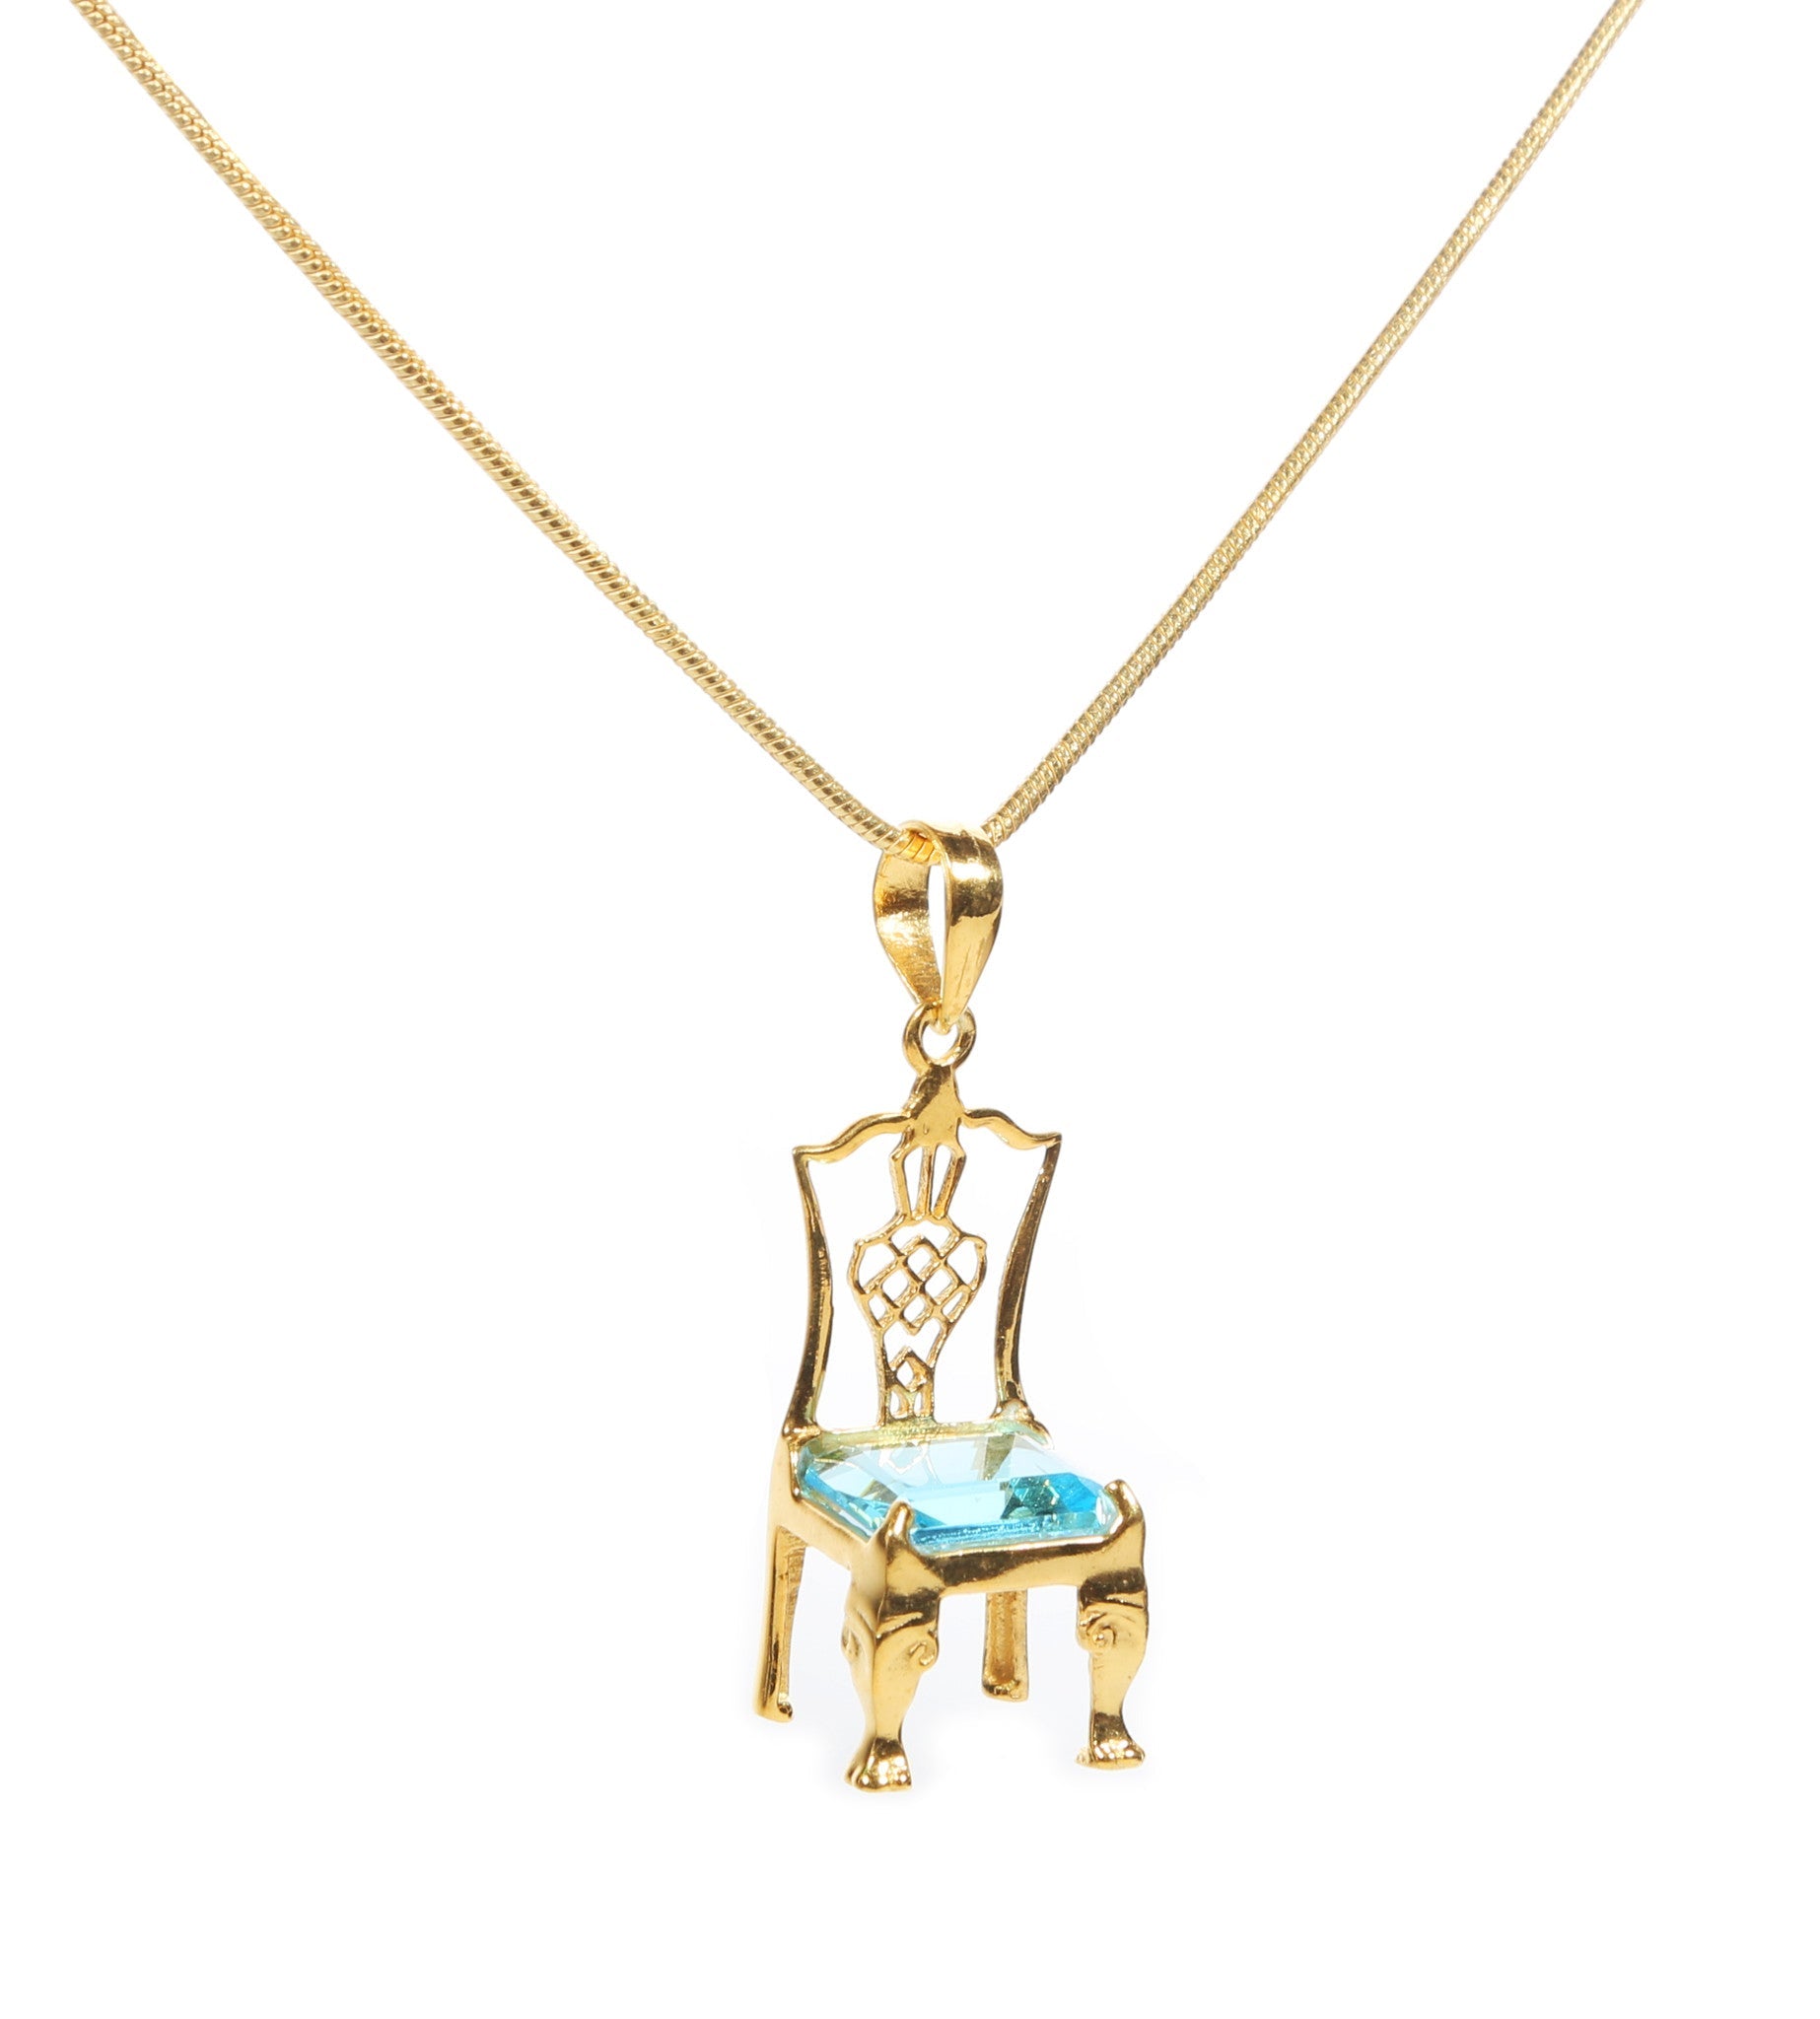 Your Choice of Birthstone Chair on Gold Necklace - Carleton Varney